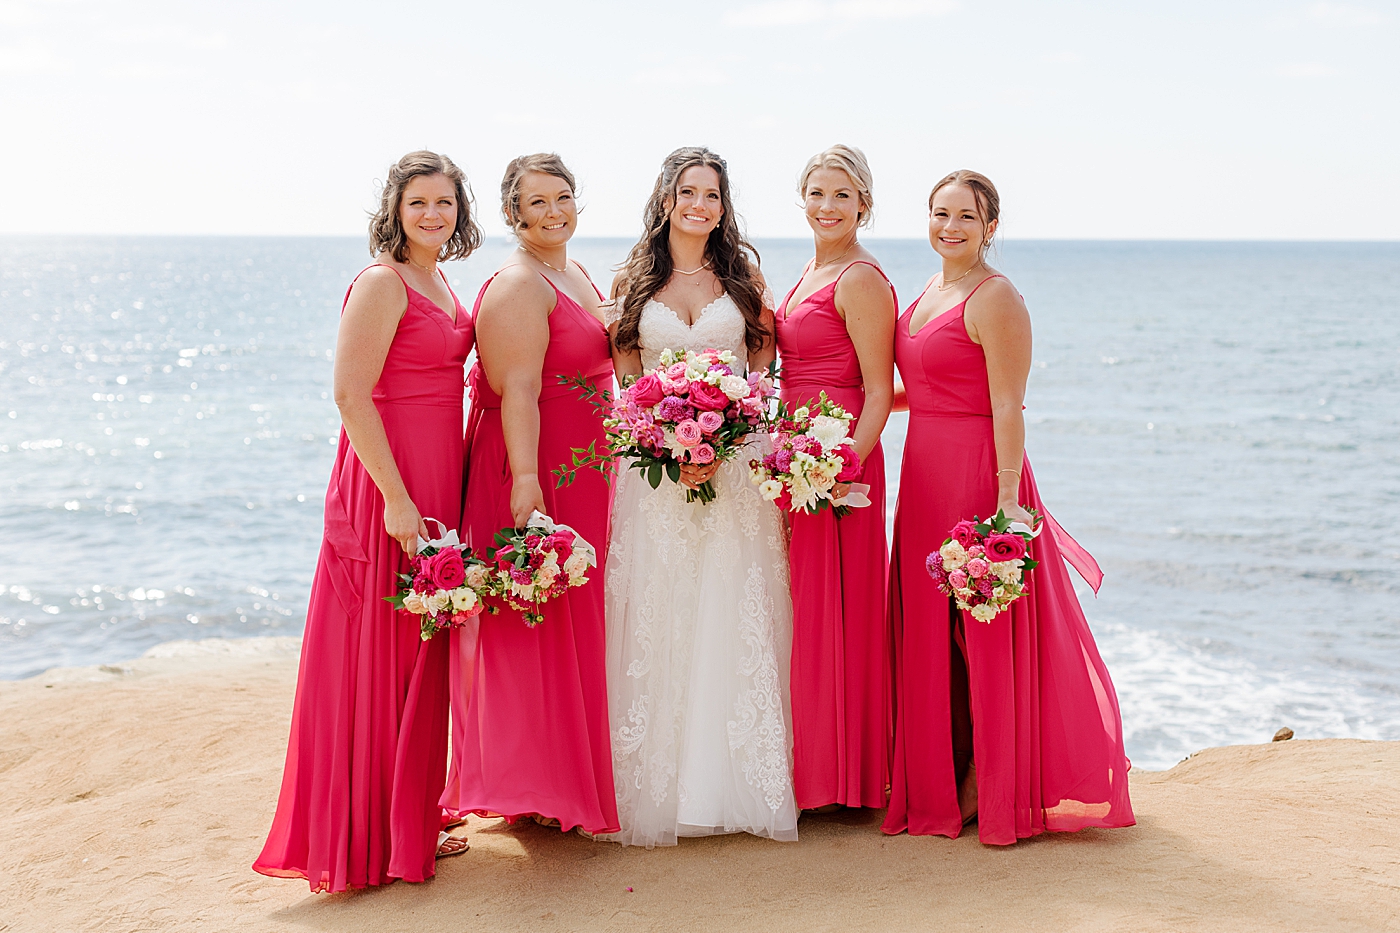 Bride and bridesmaids in hot pink looking at the camera smiling on the beach | Image by Hope Helmuth Photography